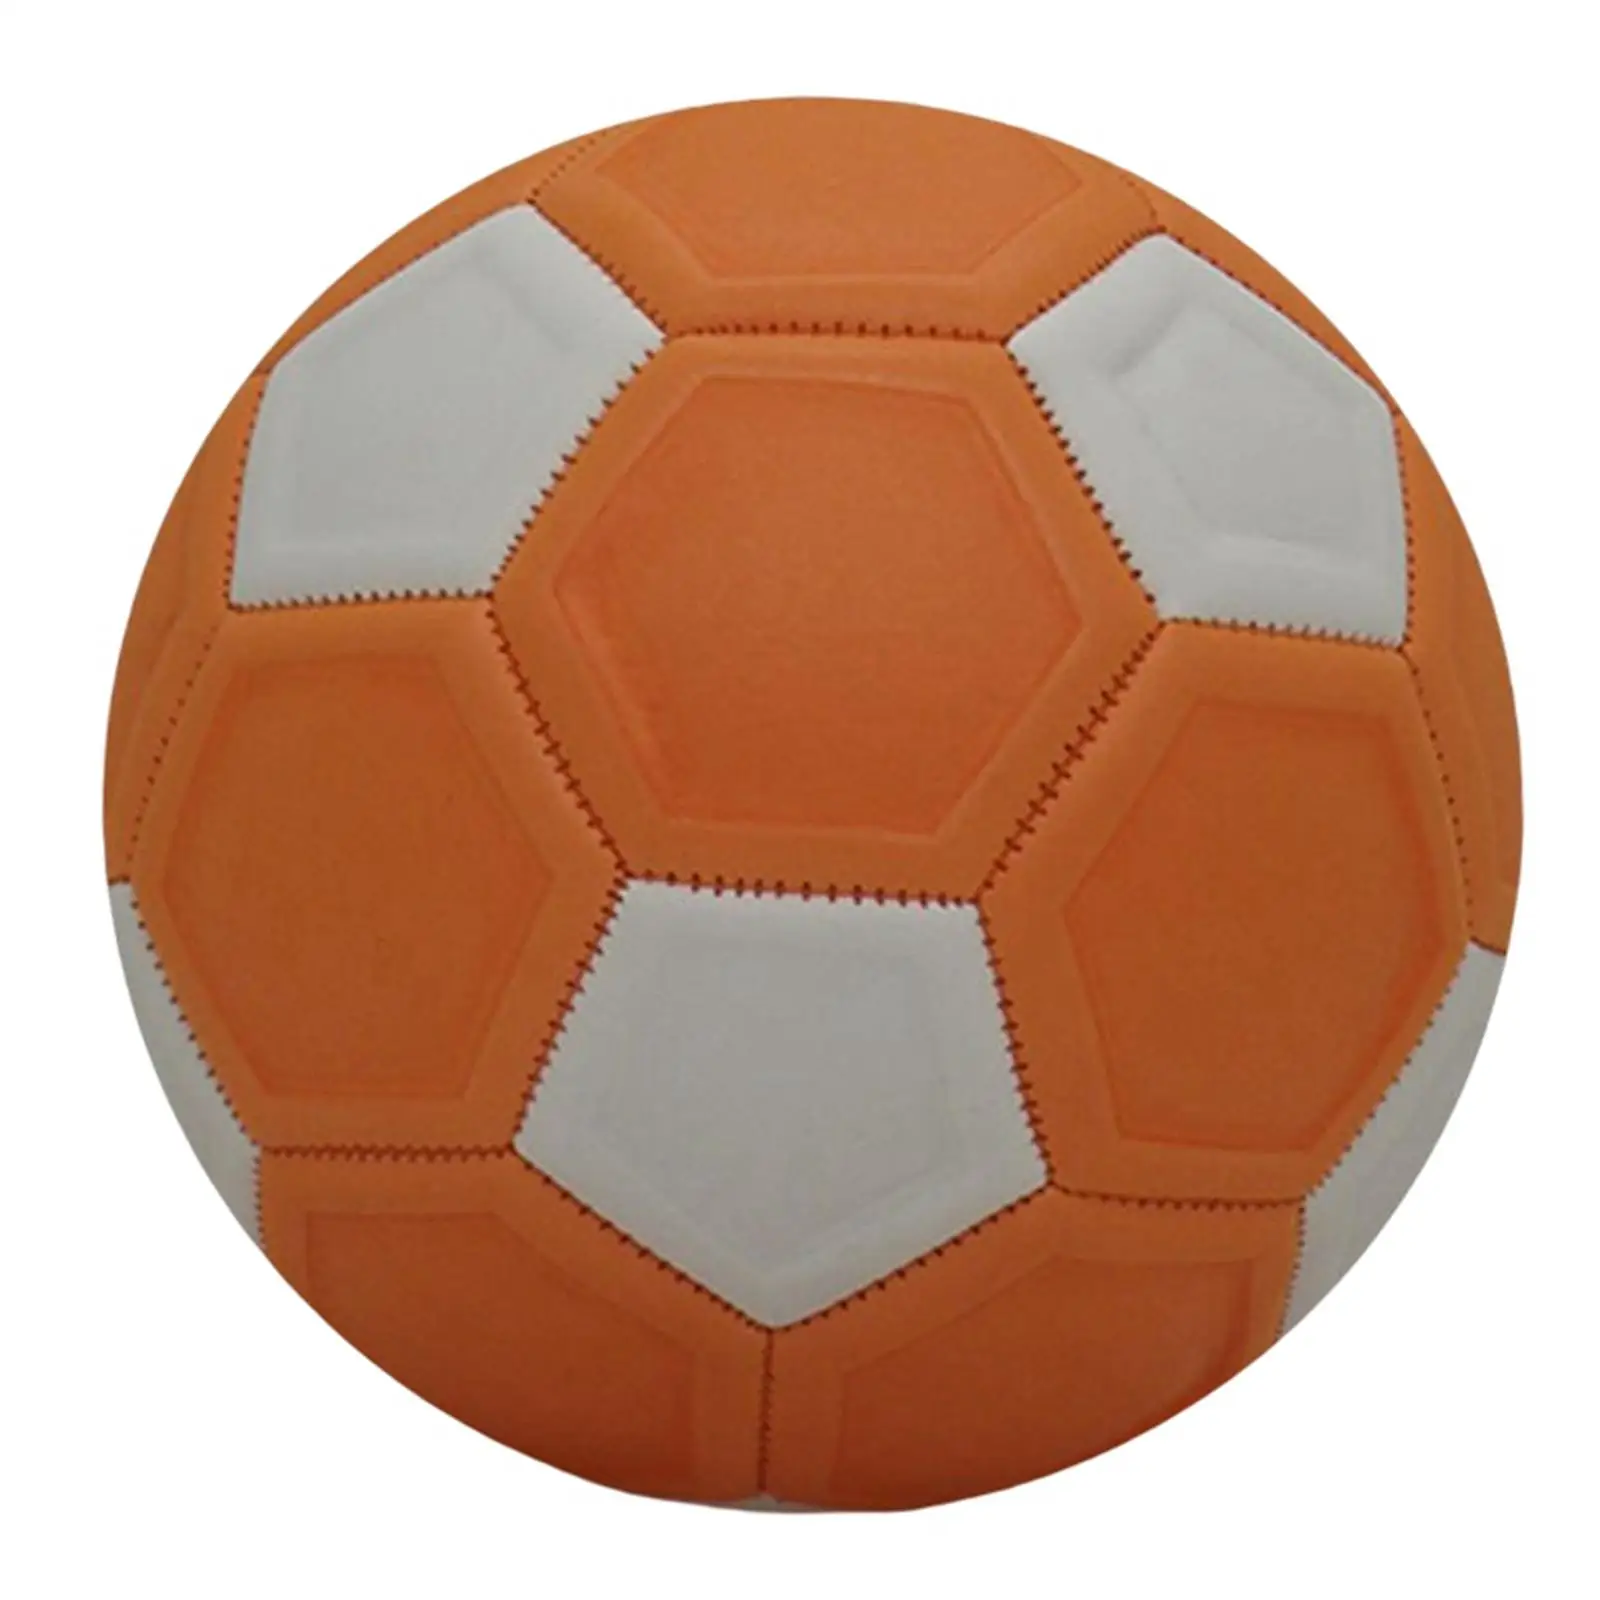 Soccer Bll Size 4 Birthdy Gift Sports Bll Trining Futsl Plytime for Youth Kids Toddlers Girls Boys Teens Indoor Outdoor